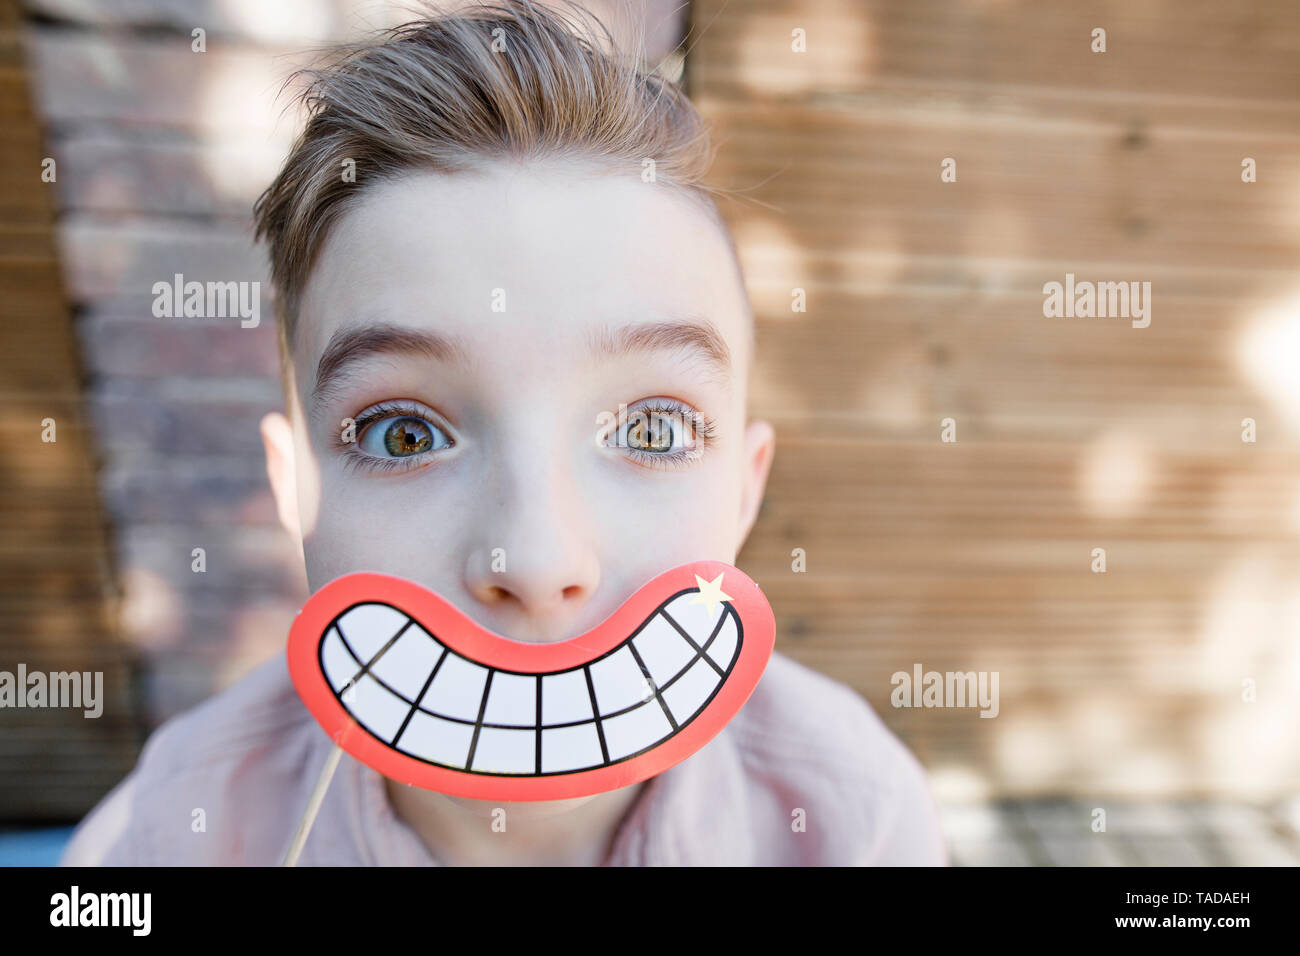 Blond boy with grinning mouth mask Stock Photo